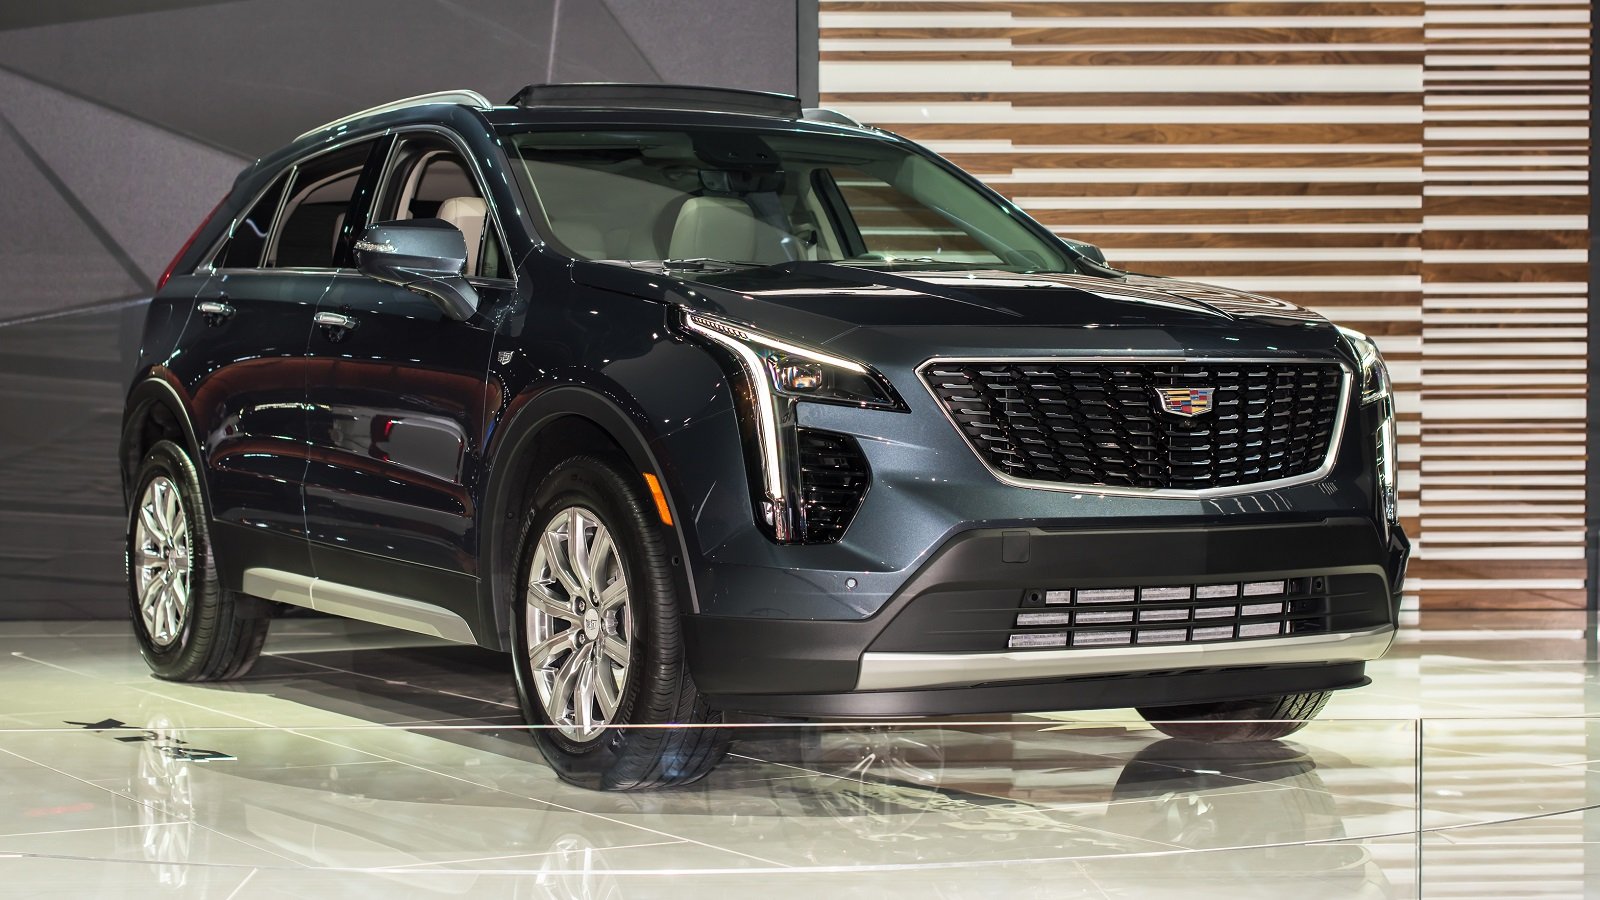 <p>The Cadillac XT4 Sport is one of the new popular cars in 2024. However, there are some important concerns to consider before making a purchase.</p><ul> <li><strong>Poor Fuel Efficiency</strong>: While many cars in this segment have improved fuel efficiency, the XT4 Sport seems to lag behind, causing potential buyers to think twice.</li> <li><strong>Limited Interior Space</strong>: The Cadillac XT4 Sport offers less space than its competitors, making it less comfortable and impractical for larger families or long road trips.</li> <li><strong>Questionable Reliability</strong>: Reliability is a key factor for many buyers, but the XT4 Sport appears to have some issues in this department, making it less appealing.</li> <li><strong>High Price</strong>: Finally, the Cadillac XT4 Sport has a higher price tag compared to similar models on the market. This factor alone might discourage potential buyers.</li> </ul>